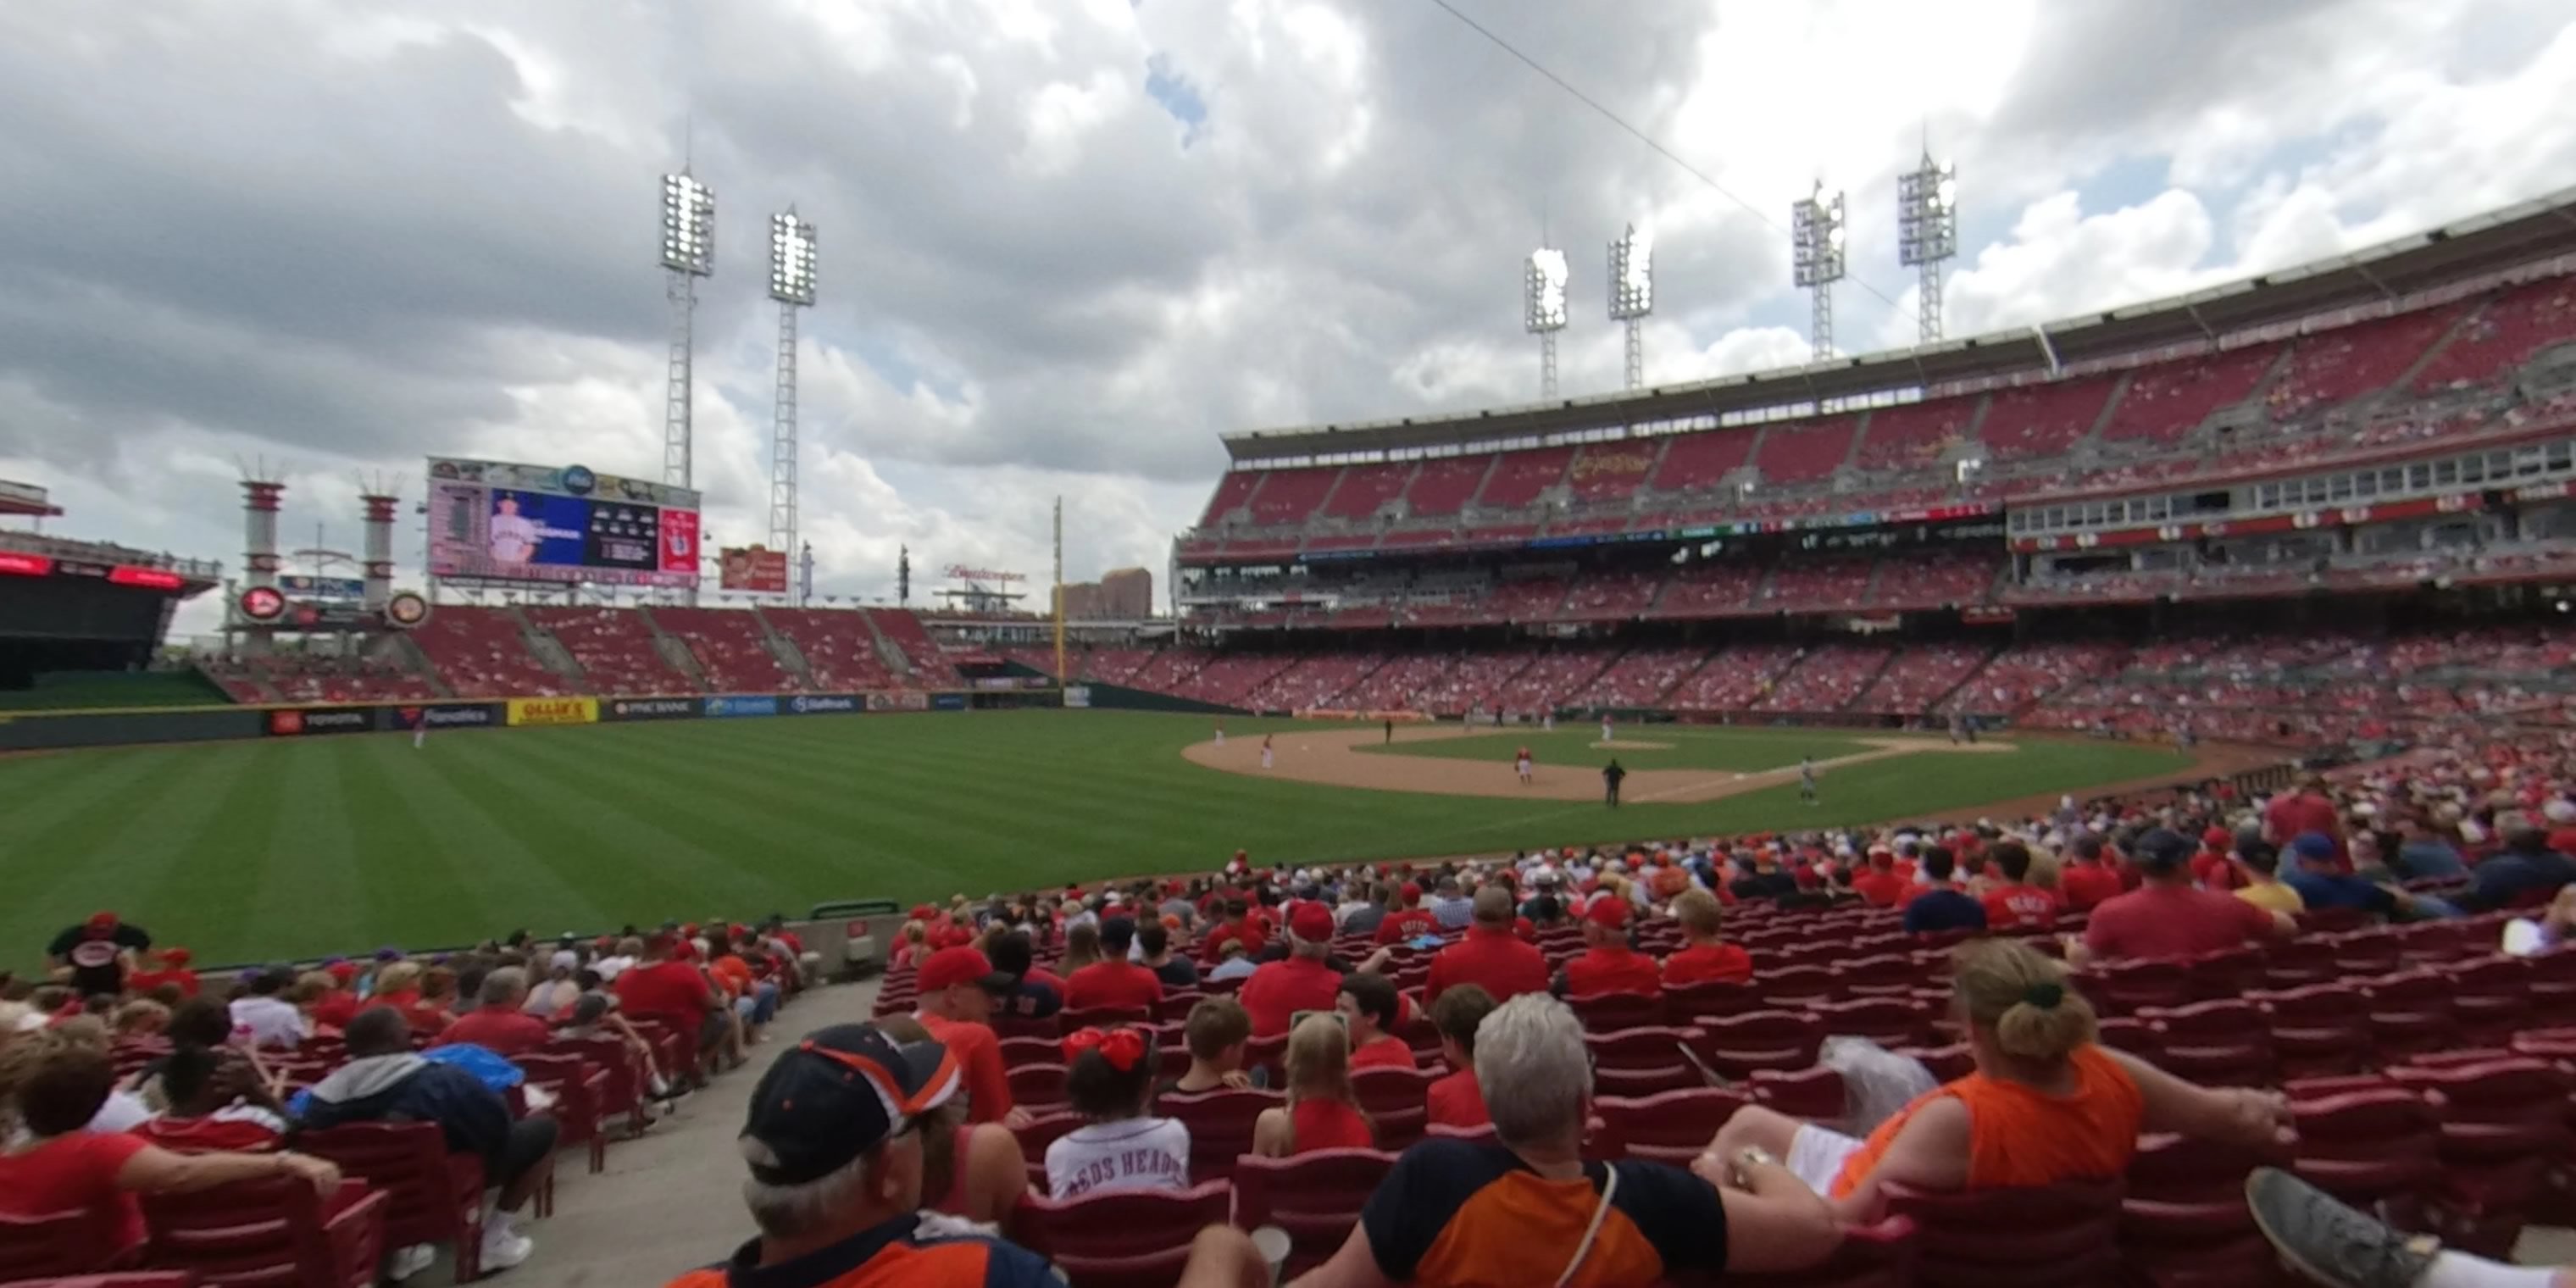 Reds Seating Chart Section 110